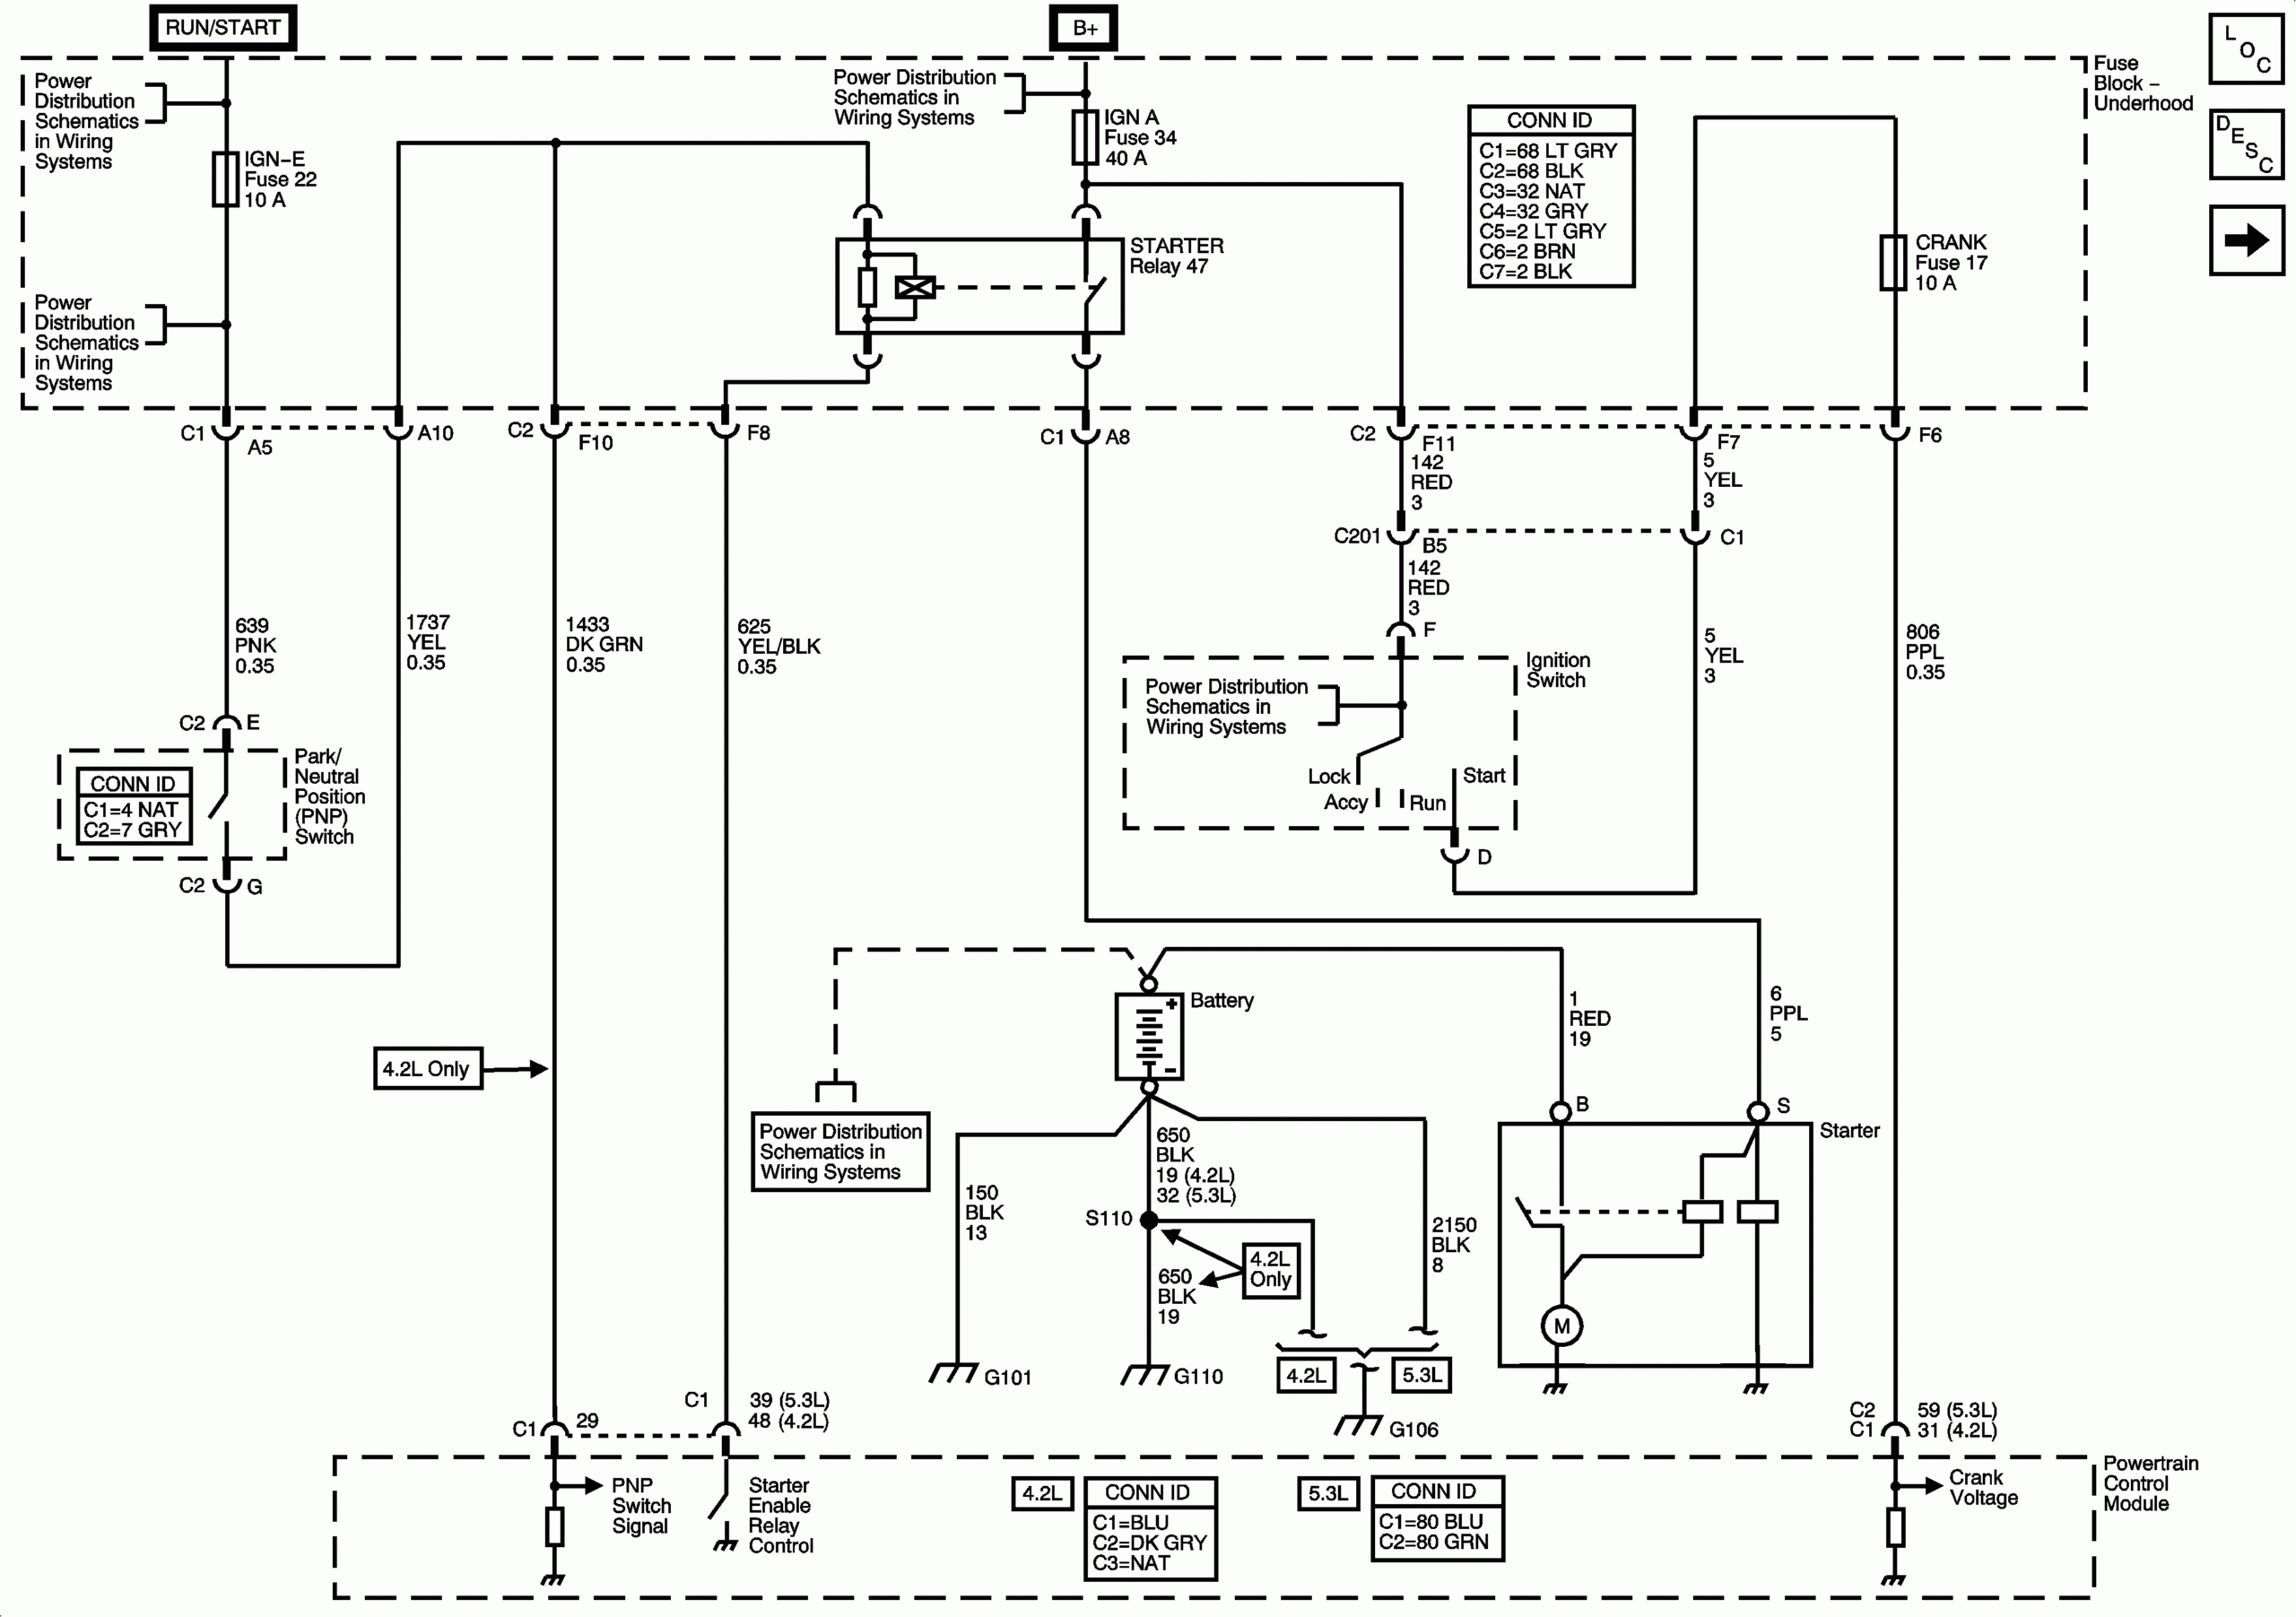 I Need Information About The Electrical System In The 2003 Chevy